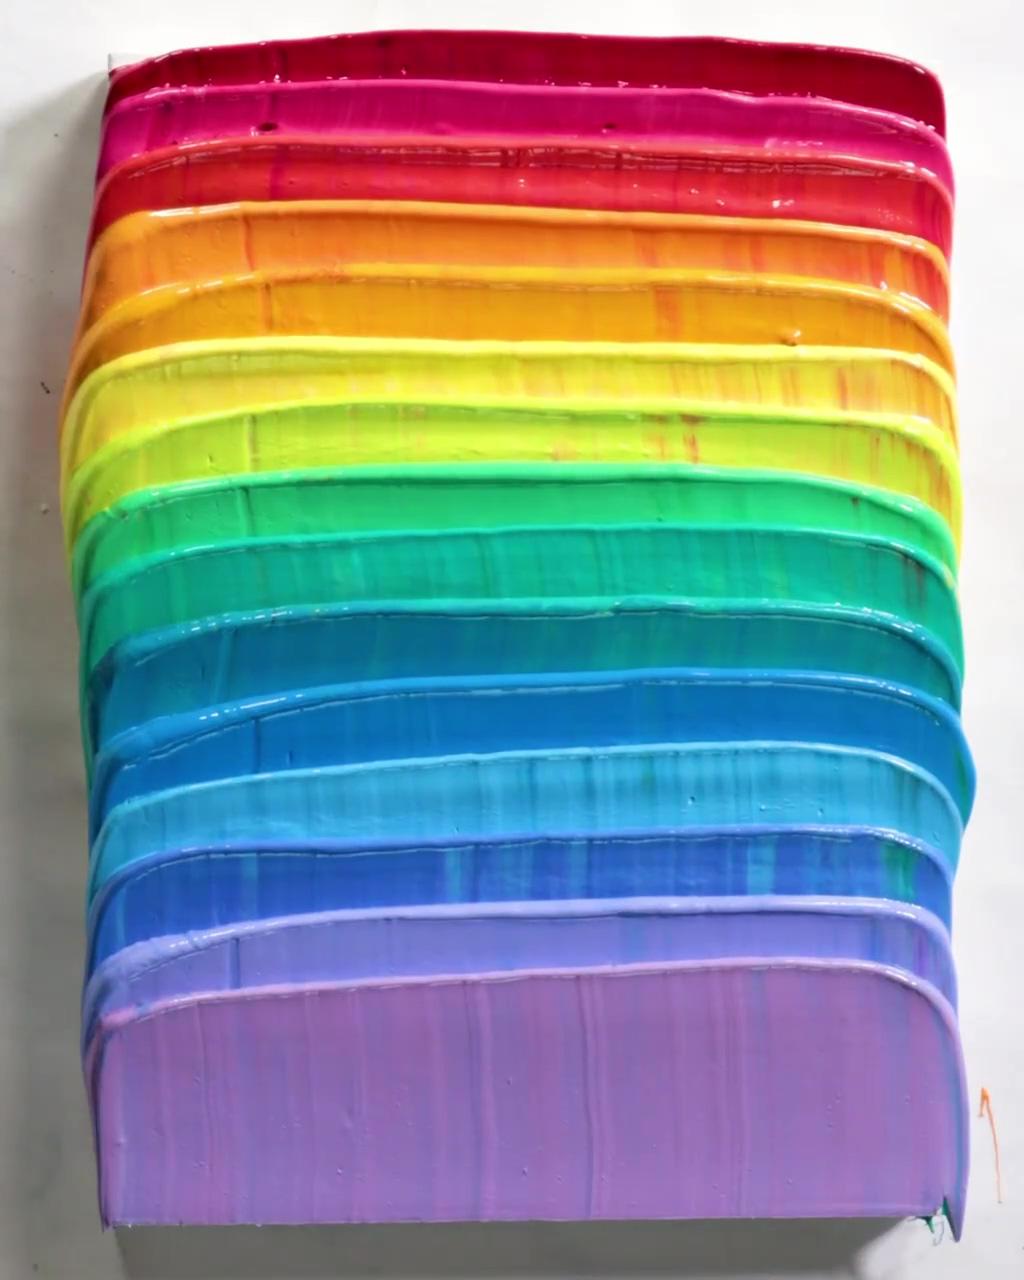 Amazing thick acrylic rainbow painting by josie lewis; creative painting